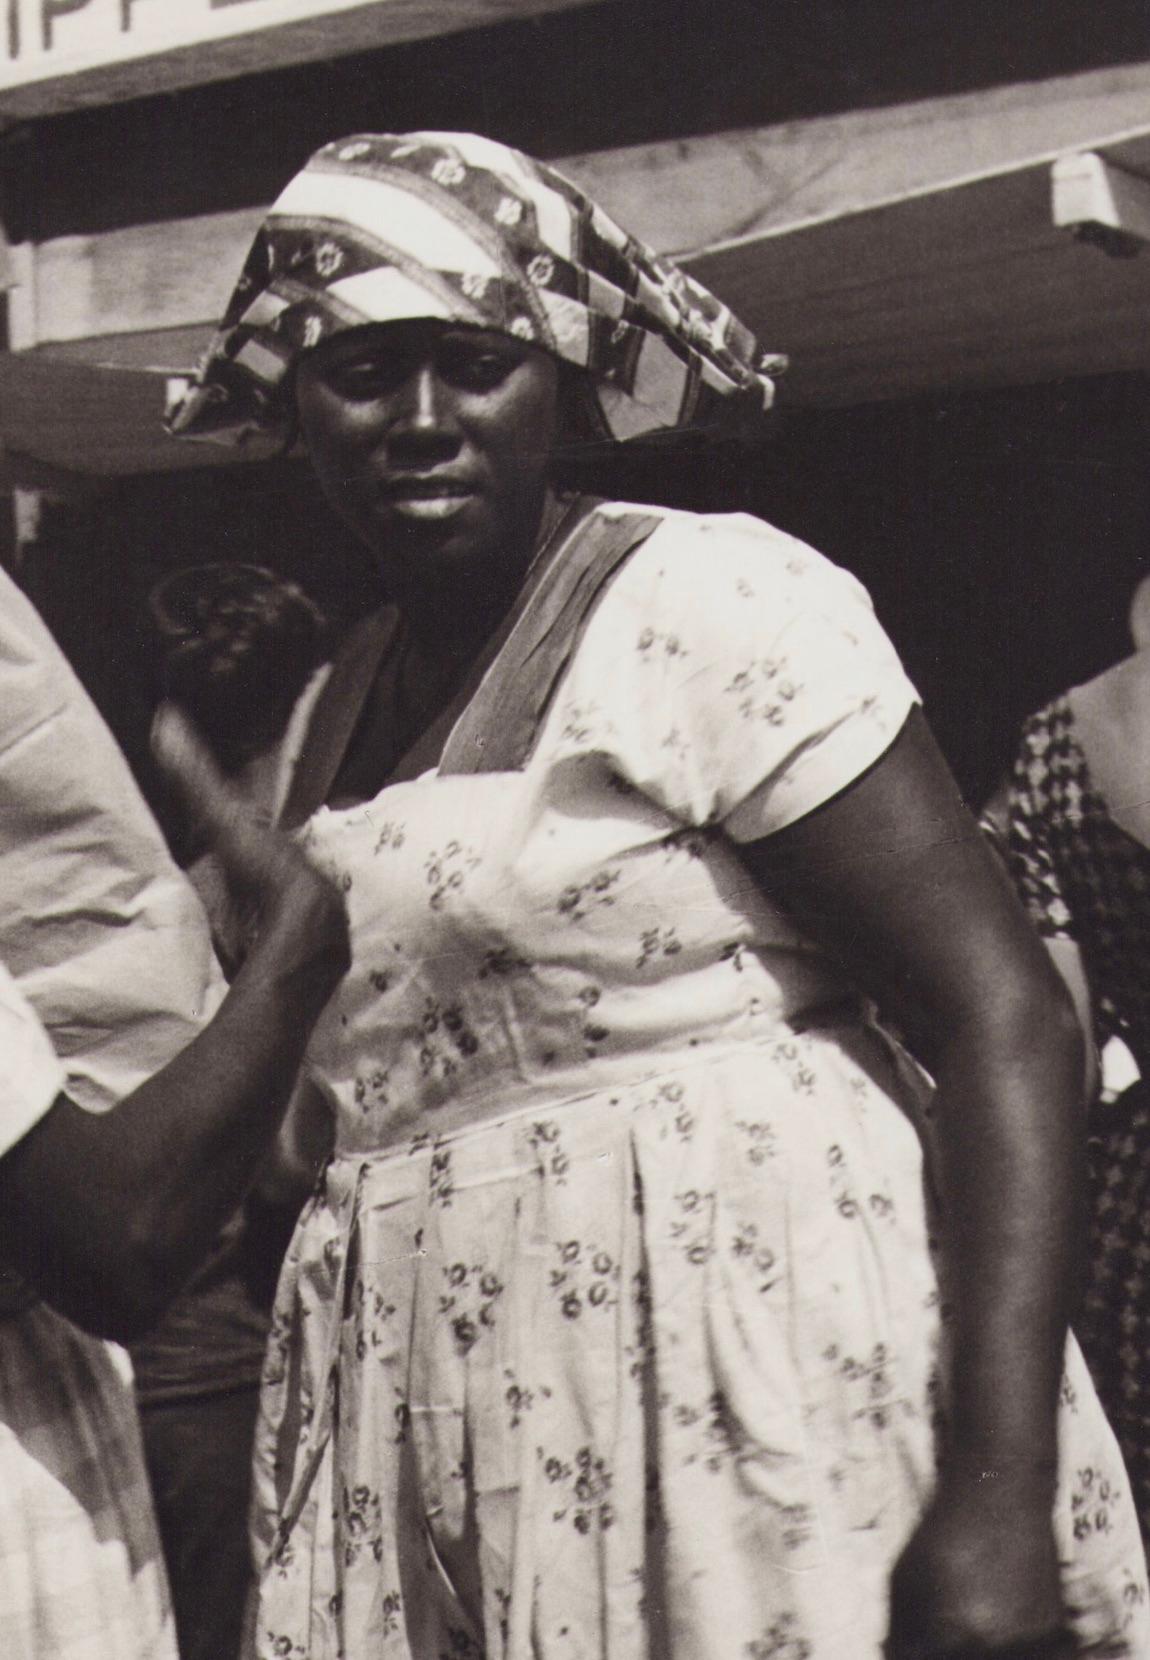 Suriname, Market, Woman, Black and White Photography, 1960s, 29, 3 x 24 cm For Sale 1